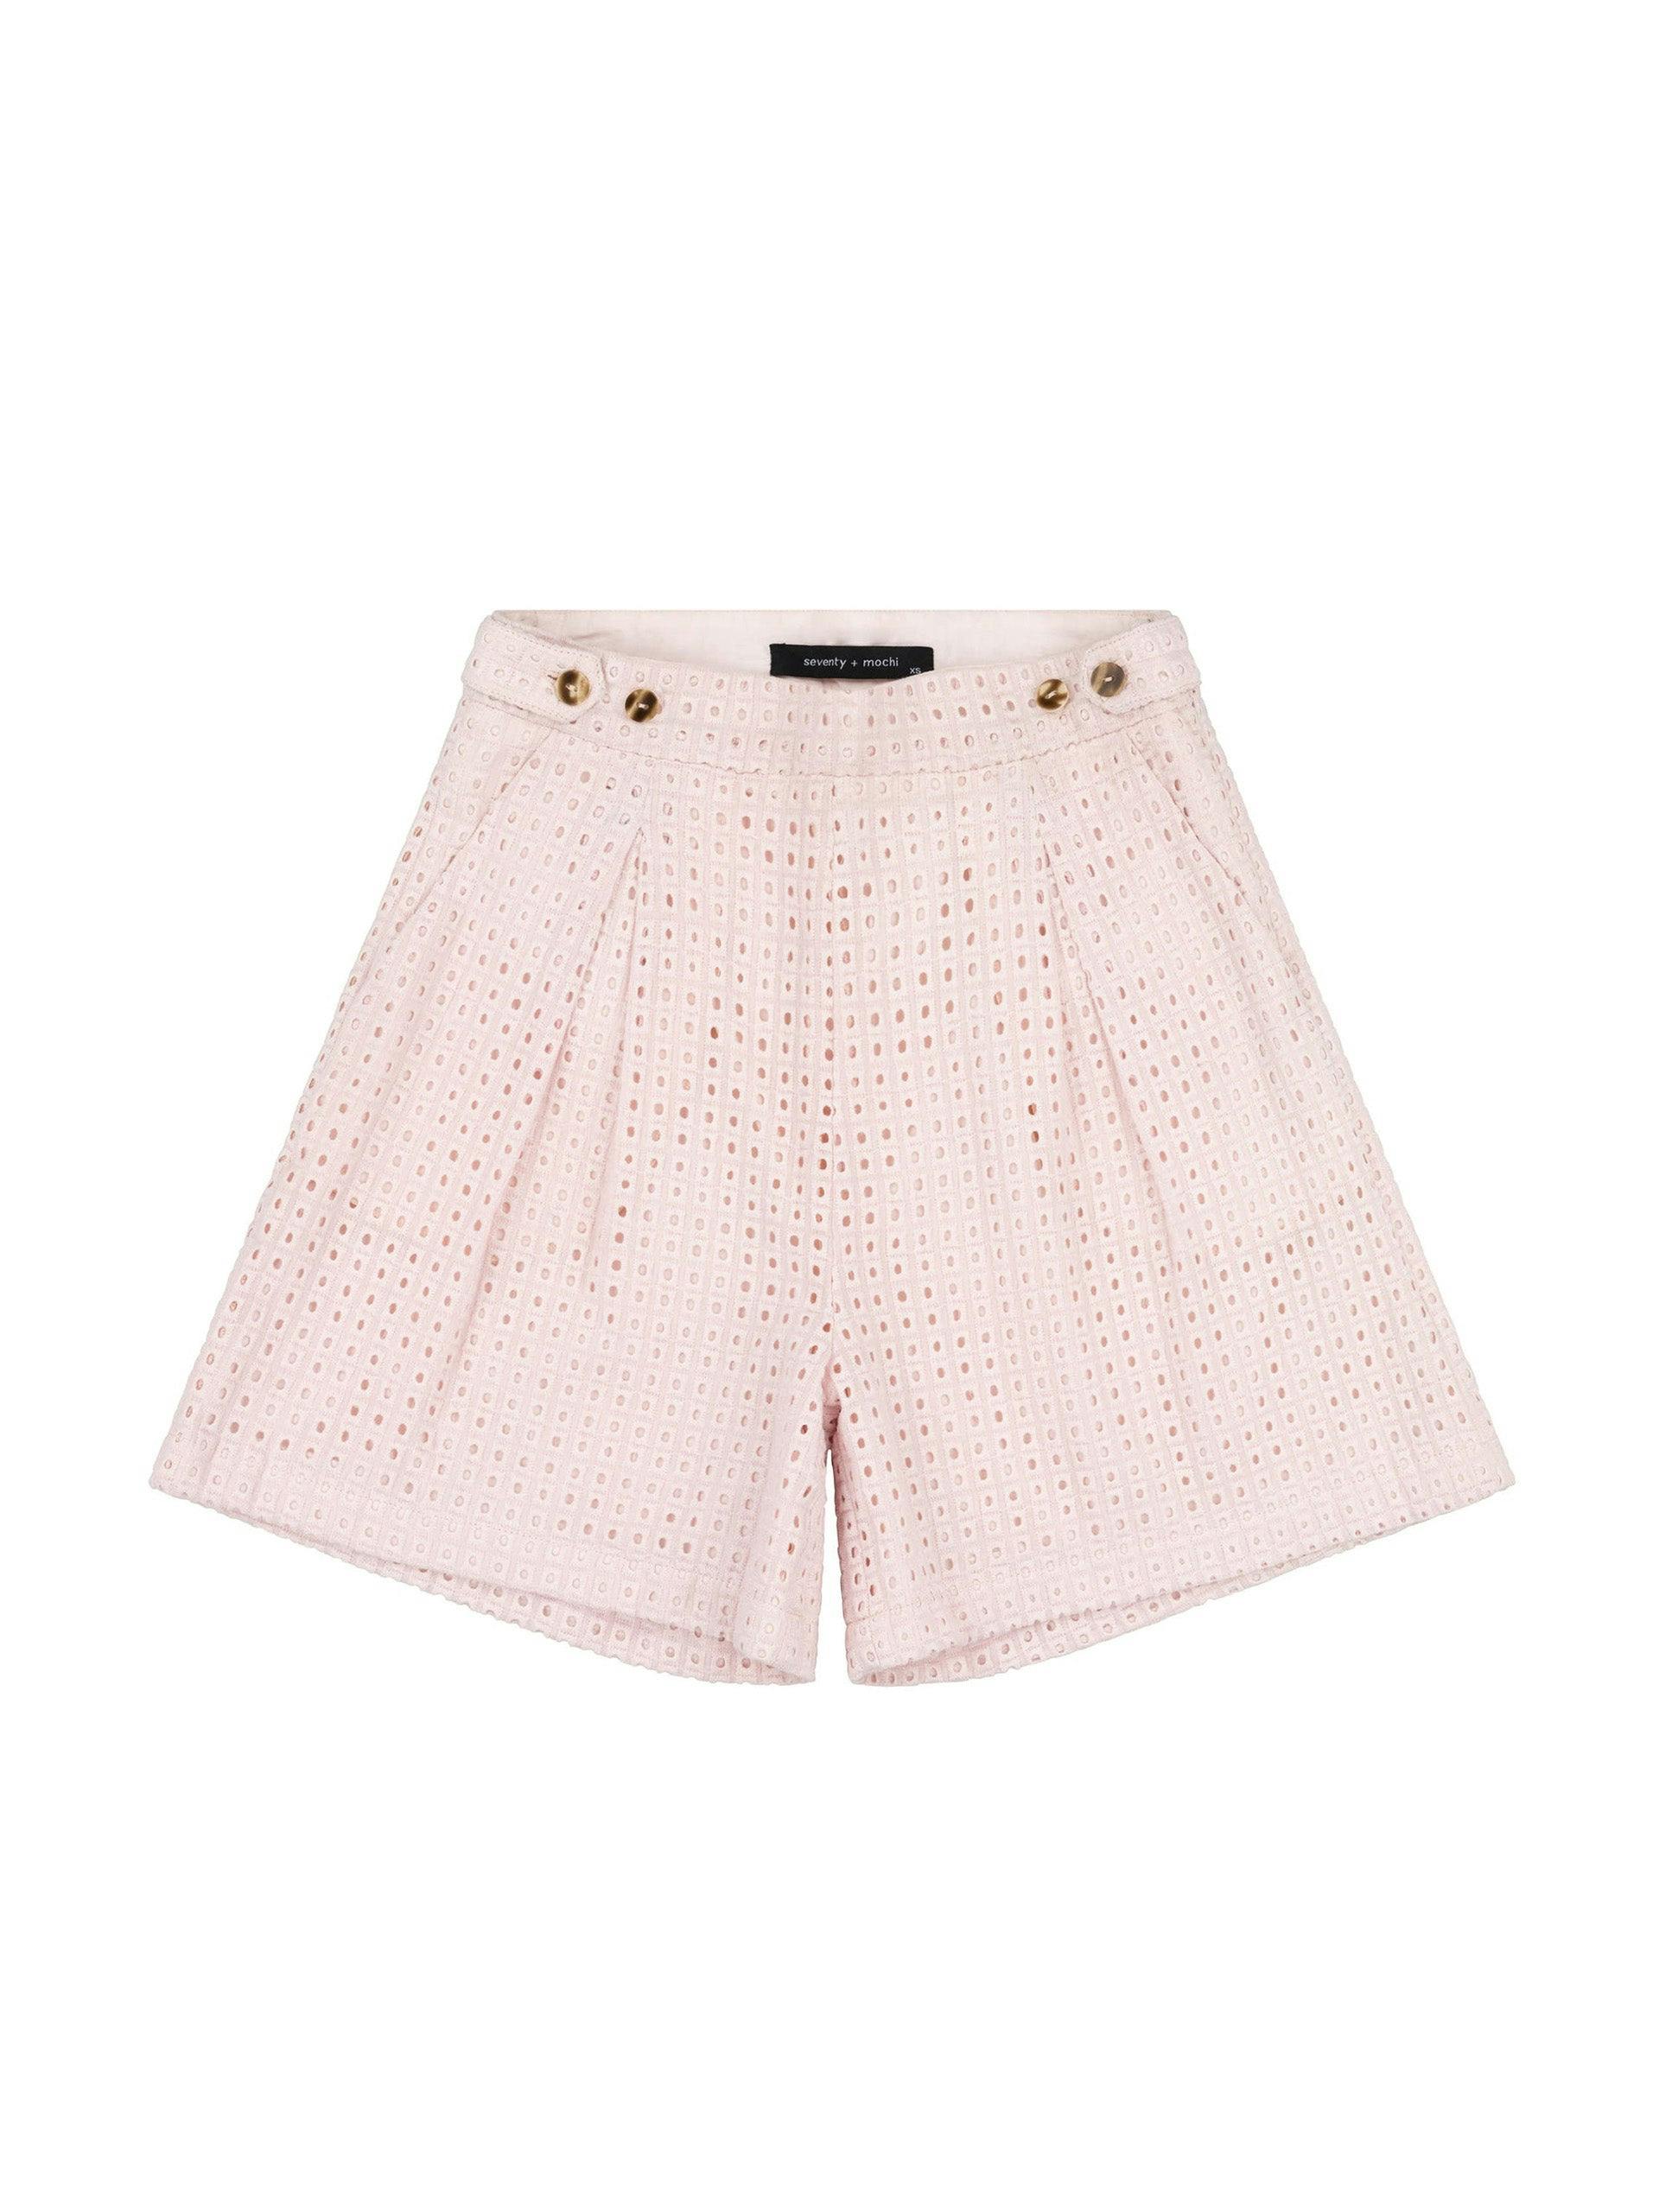 Cotton candy Hope shorts